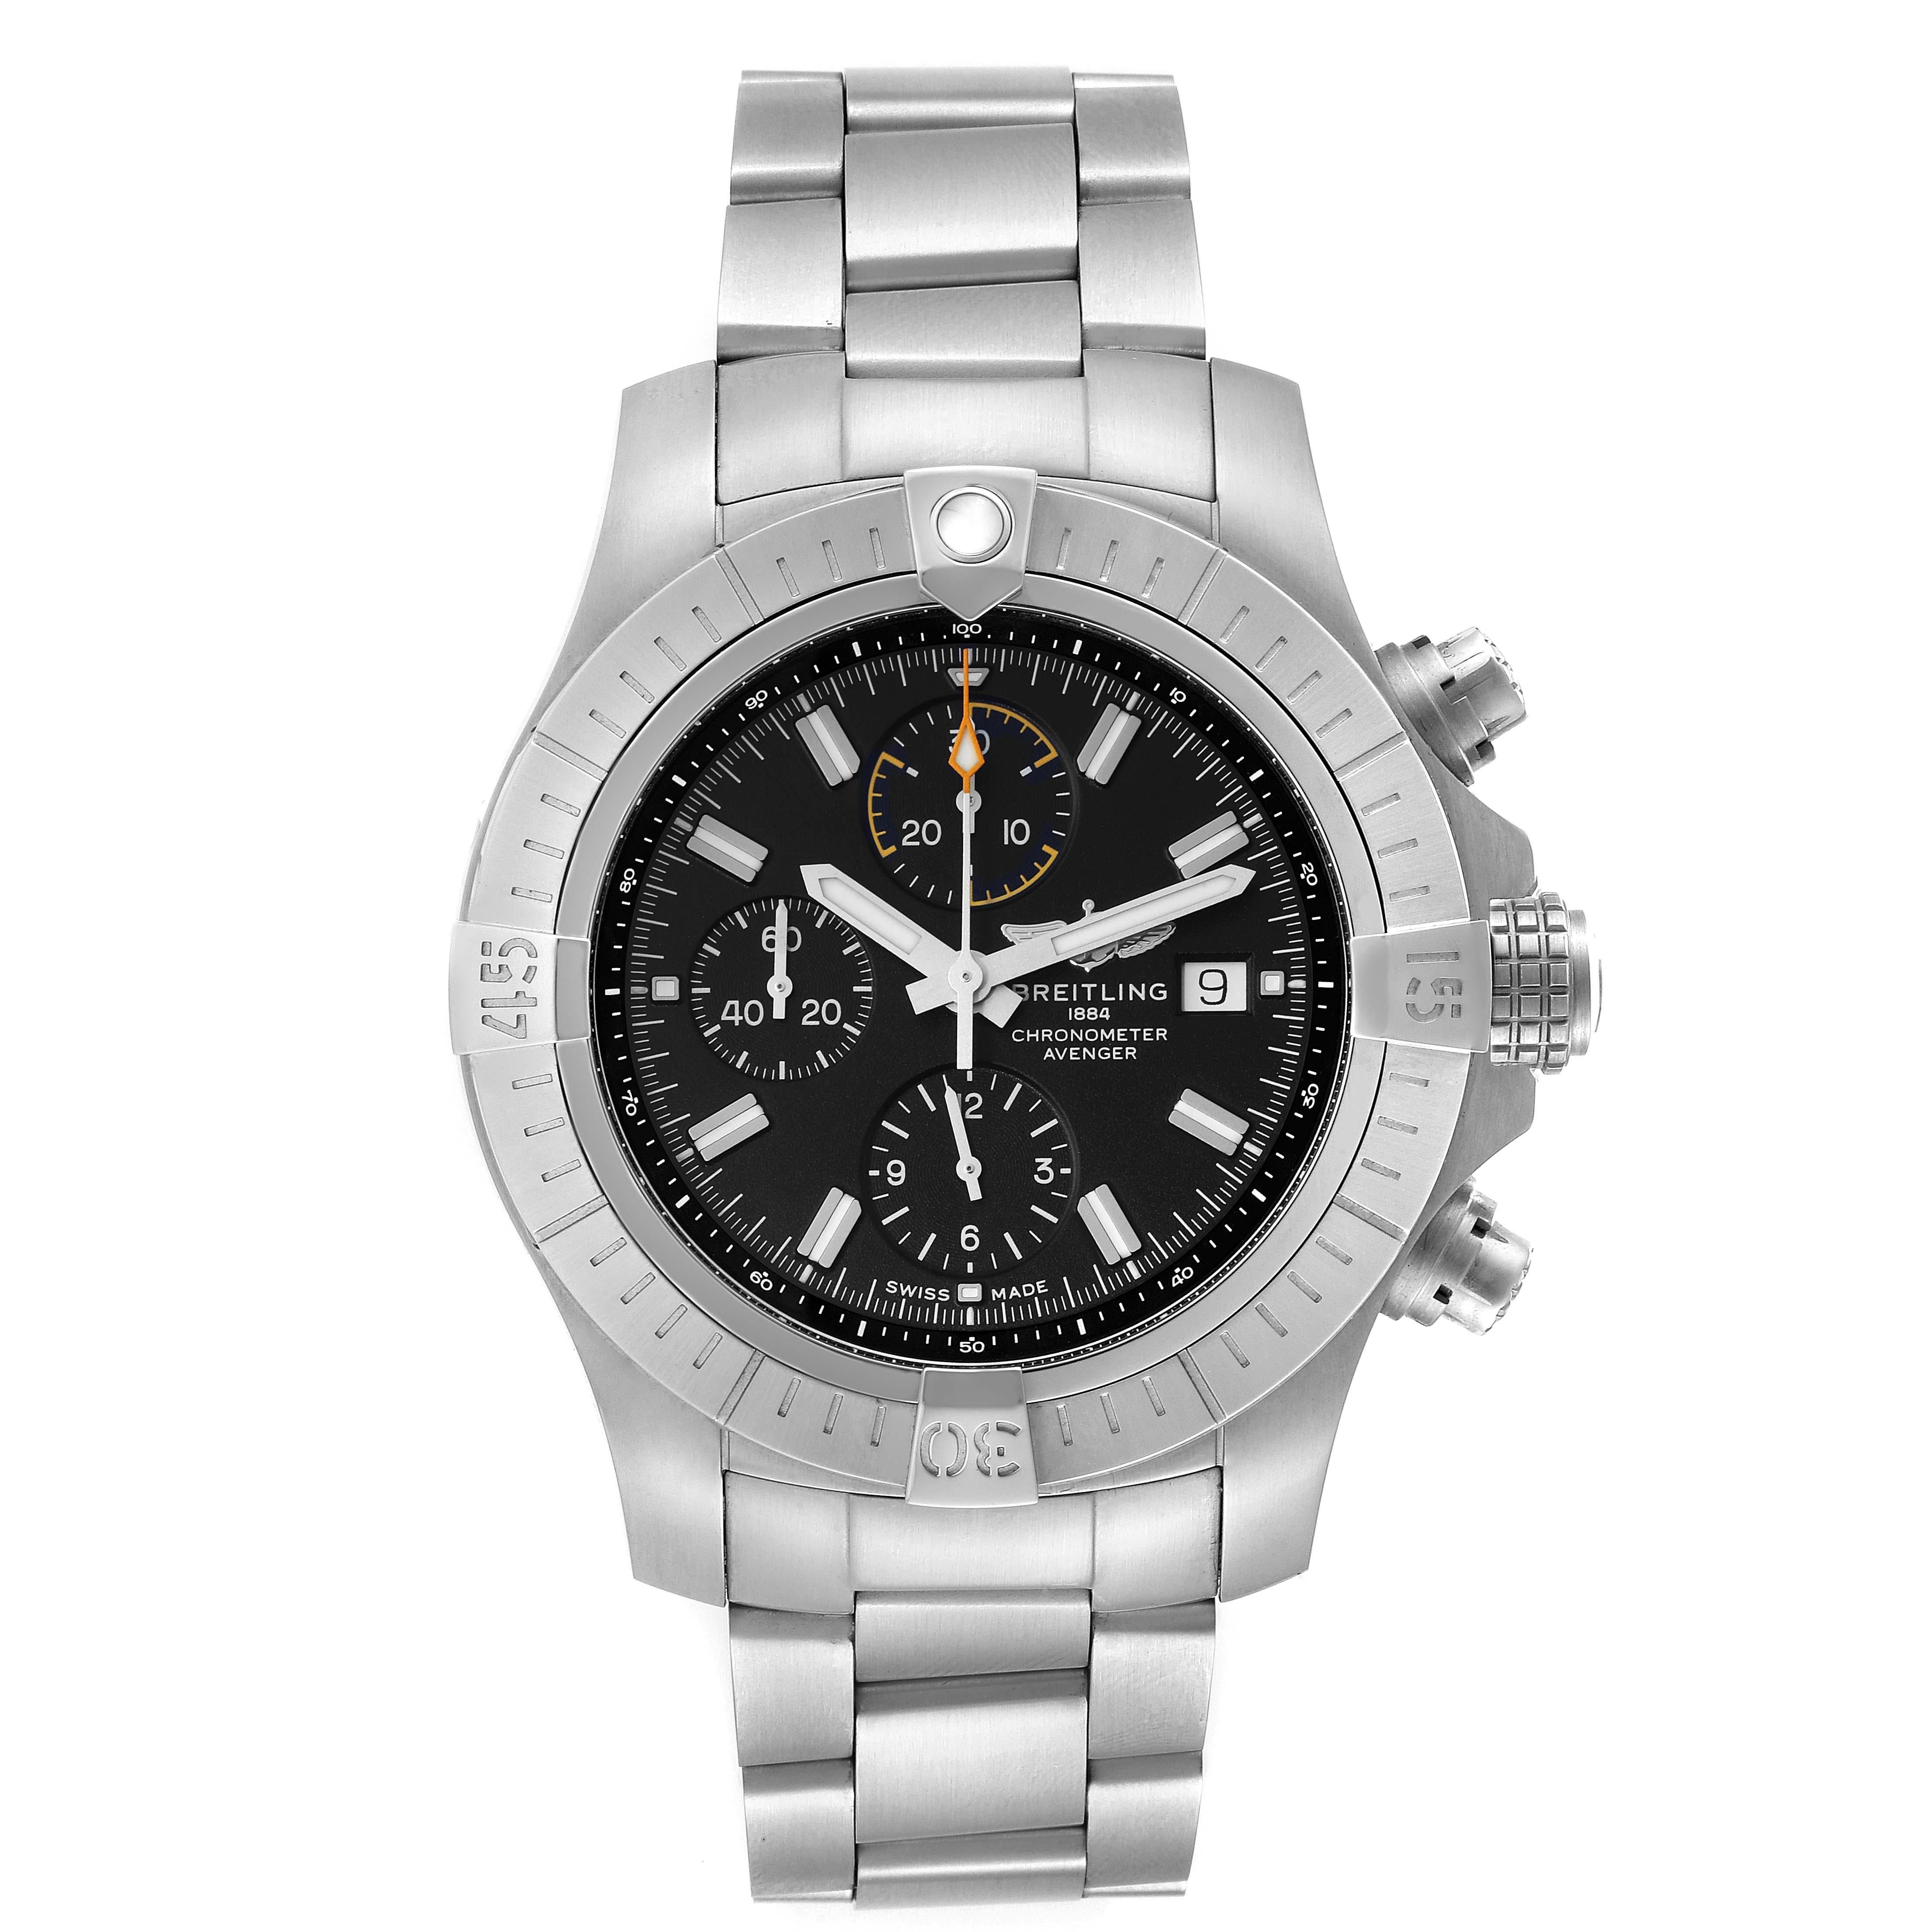 Breitling Avenger Chronograph 45 Black Dial Steel Mens Watch A13317 Unworn. Automatic self-winding movement. Chronograph function. Stainless steel case 45 mm in diameter with screwed-locked crown and pushers. Case thickness 16.4 mm. Stainless steel